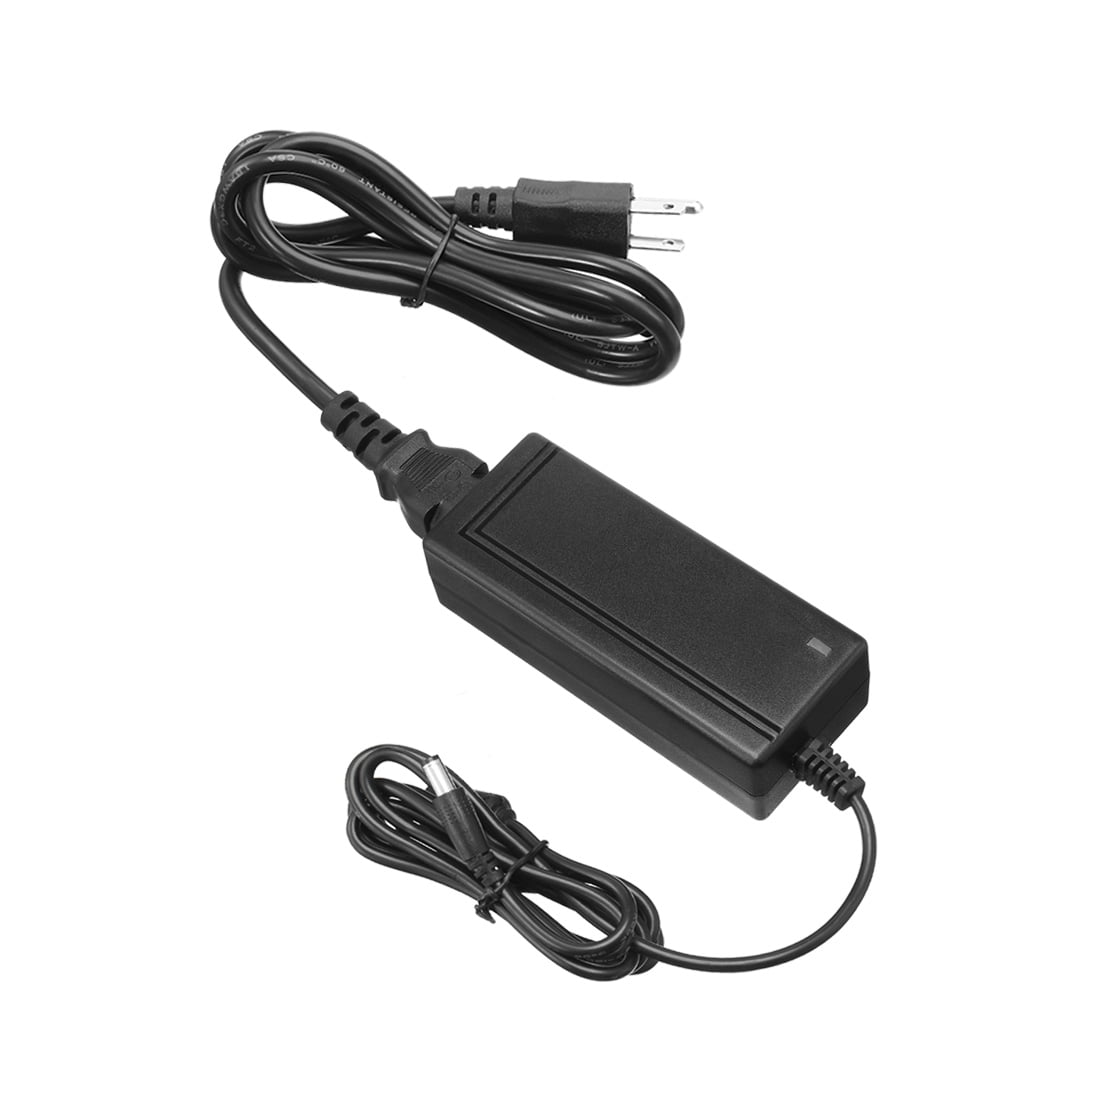 K-MAINS AC Adapter Charger For Vaddio Conferenceshot 10 USB 3.0 PTZ CAMERA  998-9990-000W. 12V 3AMP Power Supply Cord 